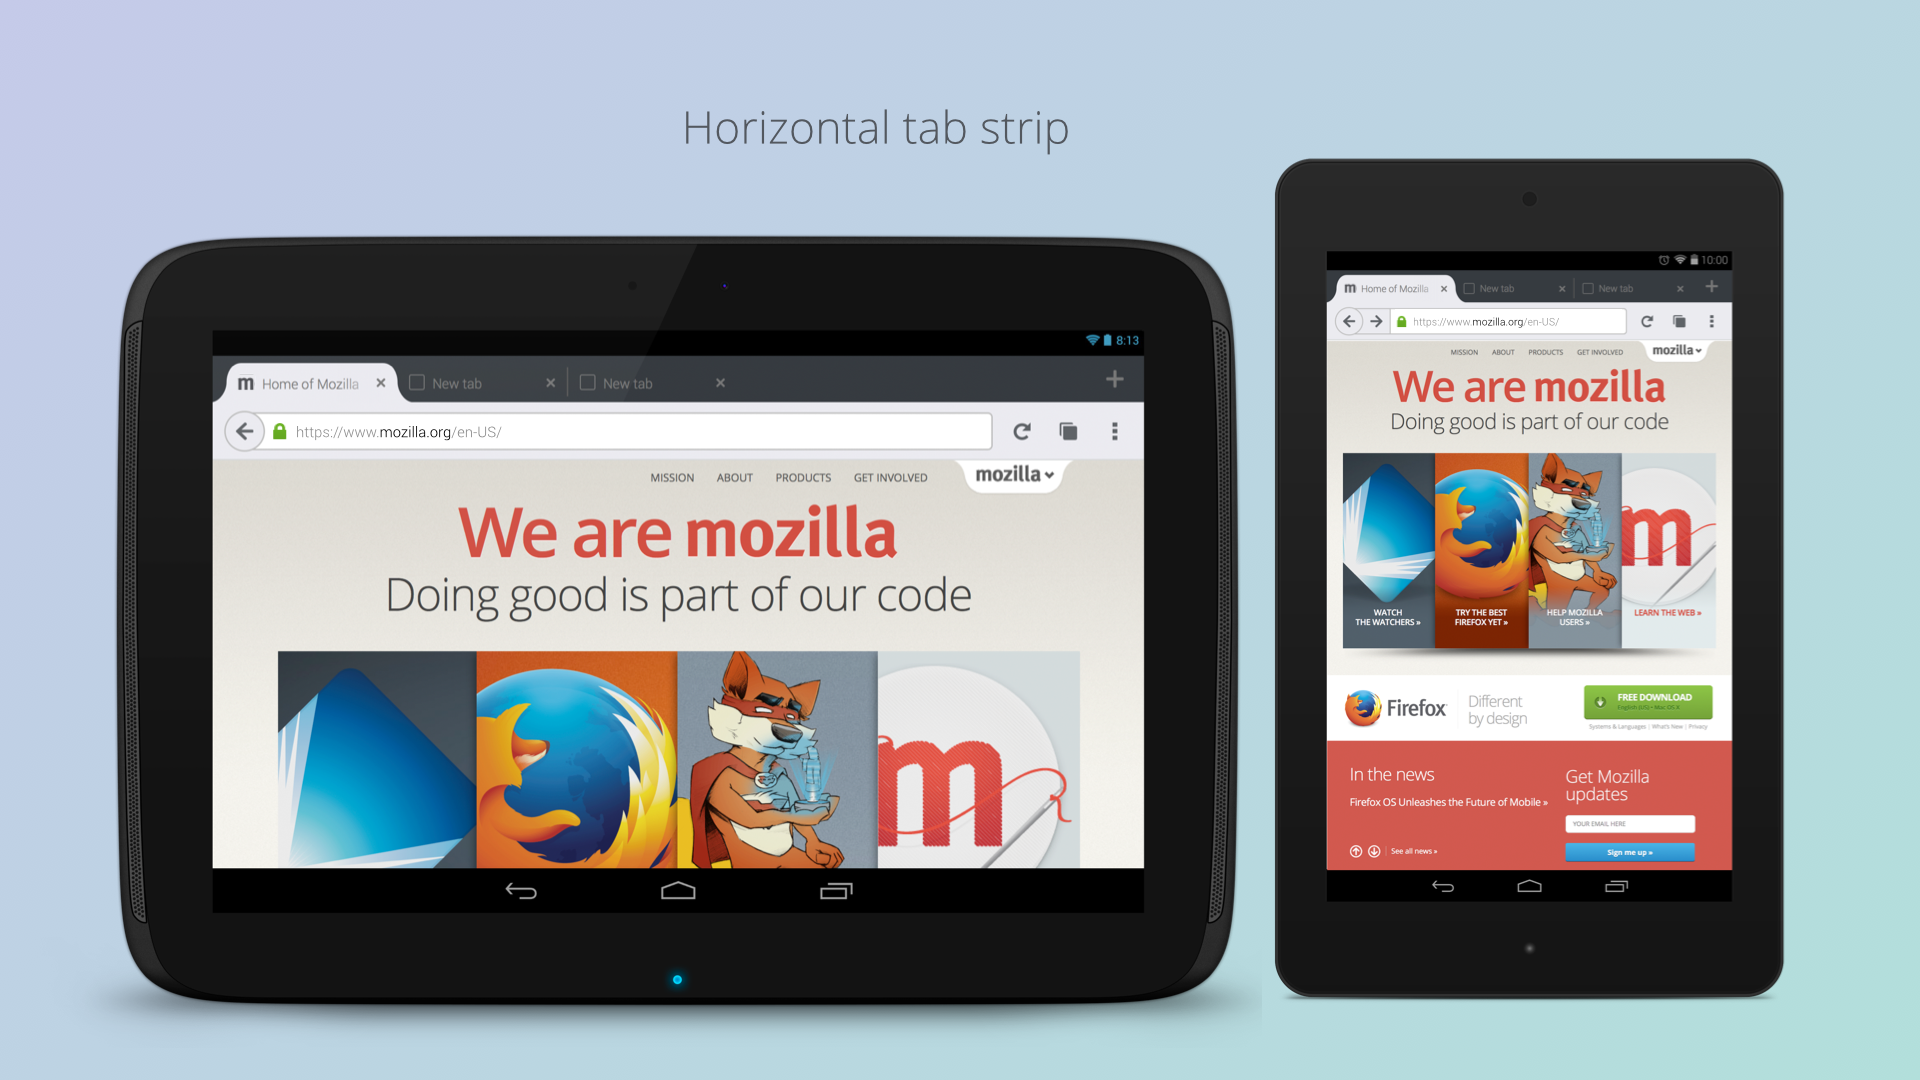 Get the tablet experience you deserve with Firefox for iPad